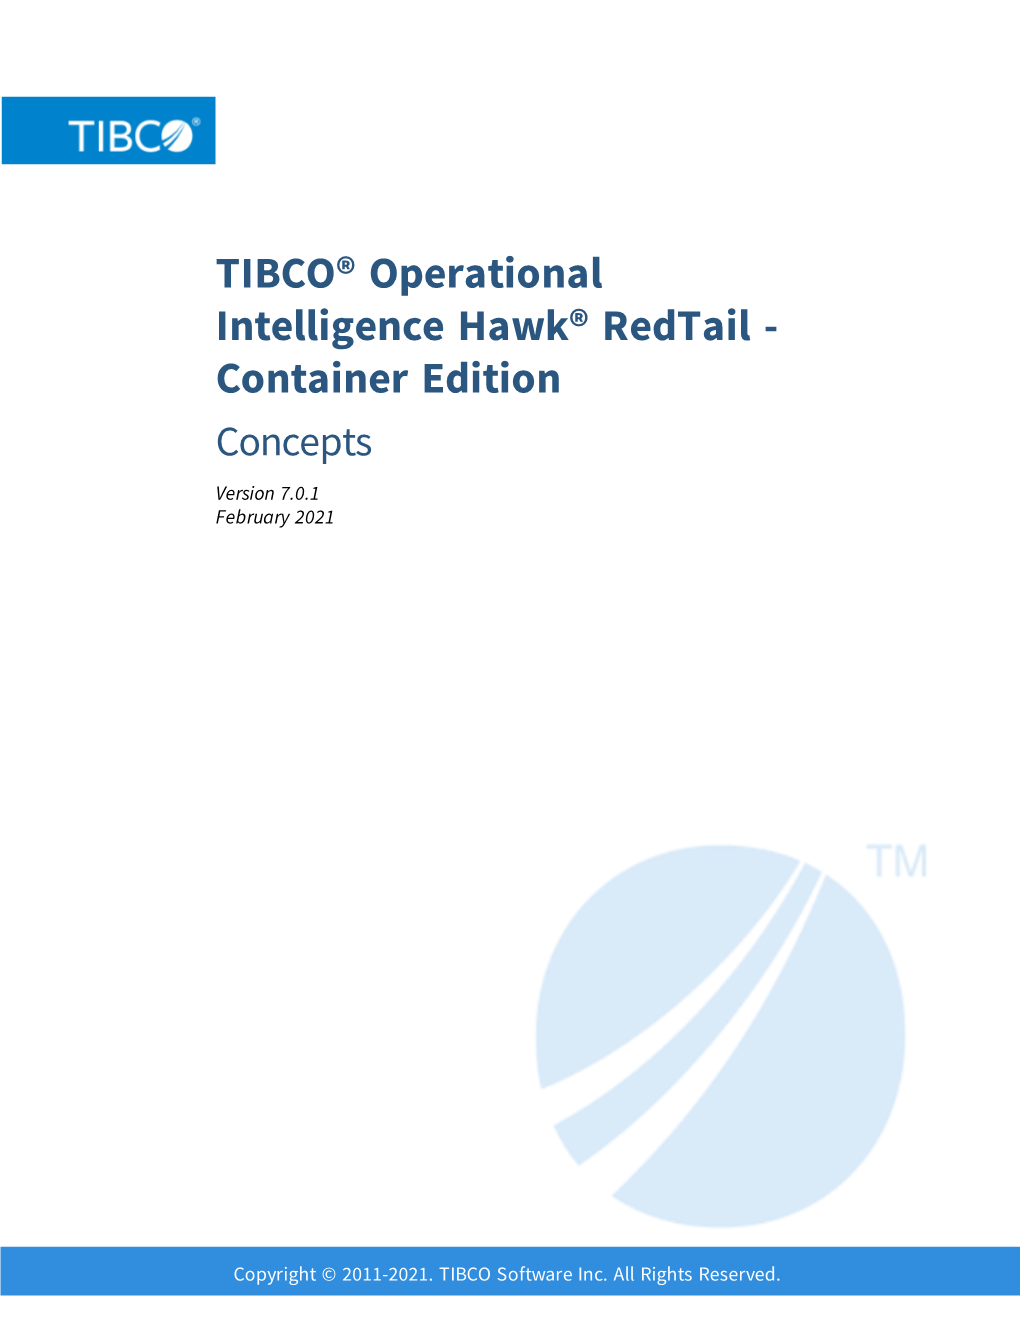 TIBCO® Operational Intelligence Hawk® Redtail - Container Edition Concepts Version 7.0.1 February 2021